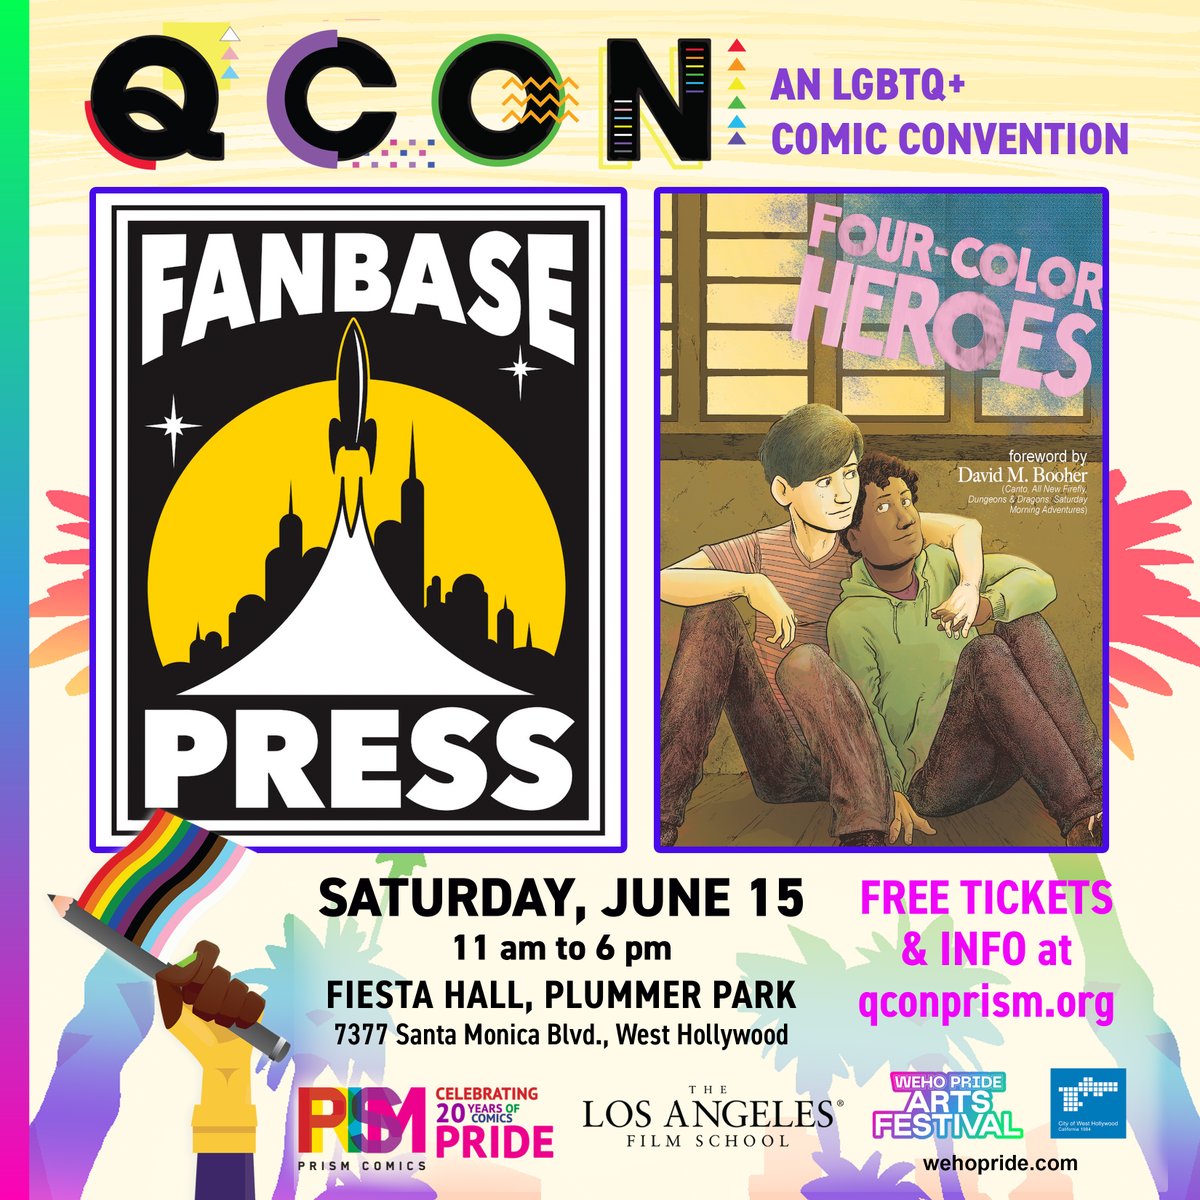 .@Fanbase_Press will be exhibiting at #SoCal's #LGBTQ+ Comic Con, @QConPrism (hosted by @prismcomics), on 6/15 at Fiesta Hall at Plummer Park in West Hollywood! Stop by for a copy of the @glaad Media Award-winning graphic novel, @4ColorHeroesGN, by @RichardFairgray!